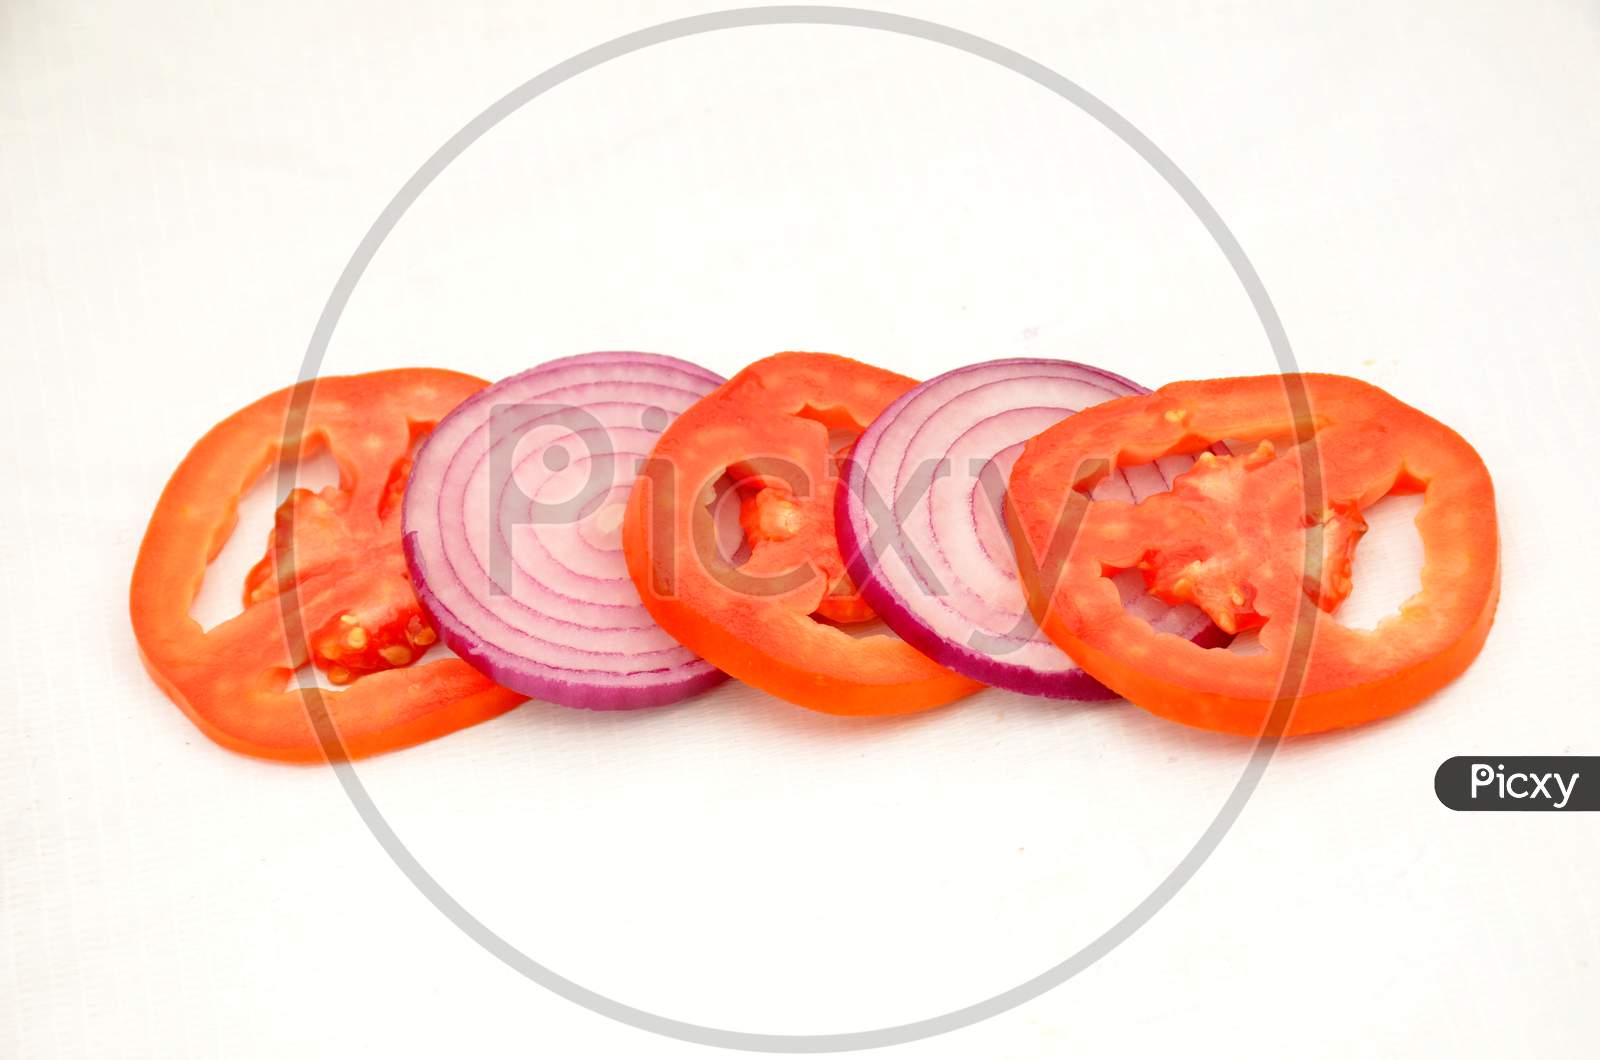 tometo and onion slice isolated on white background.